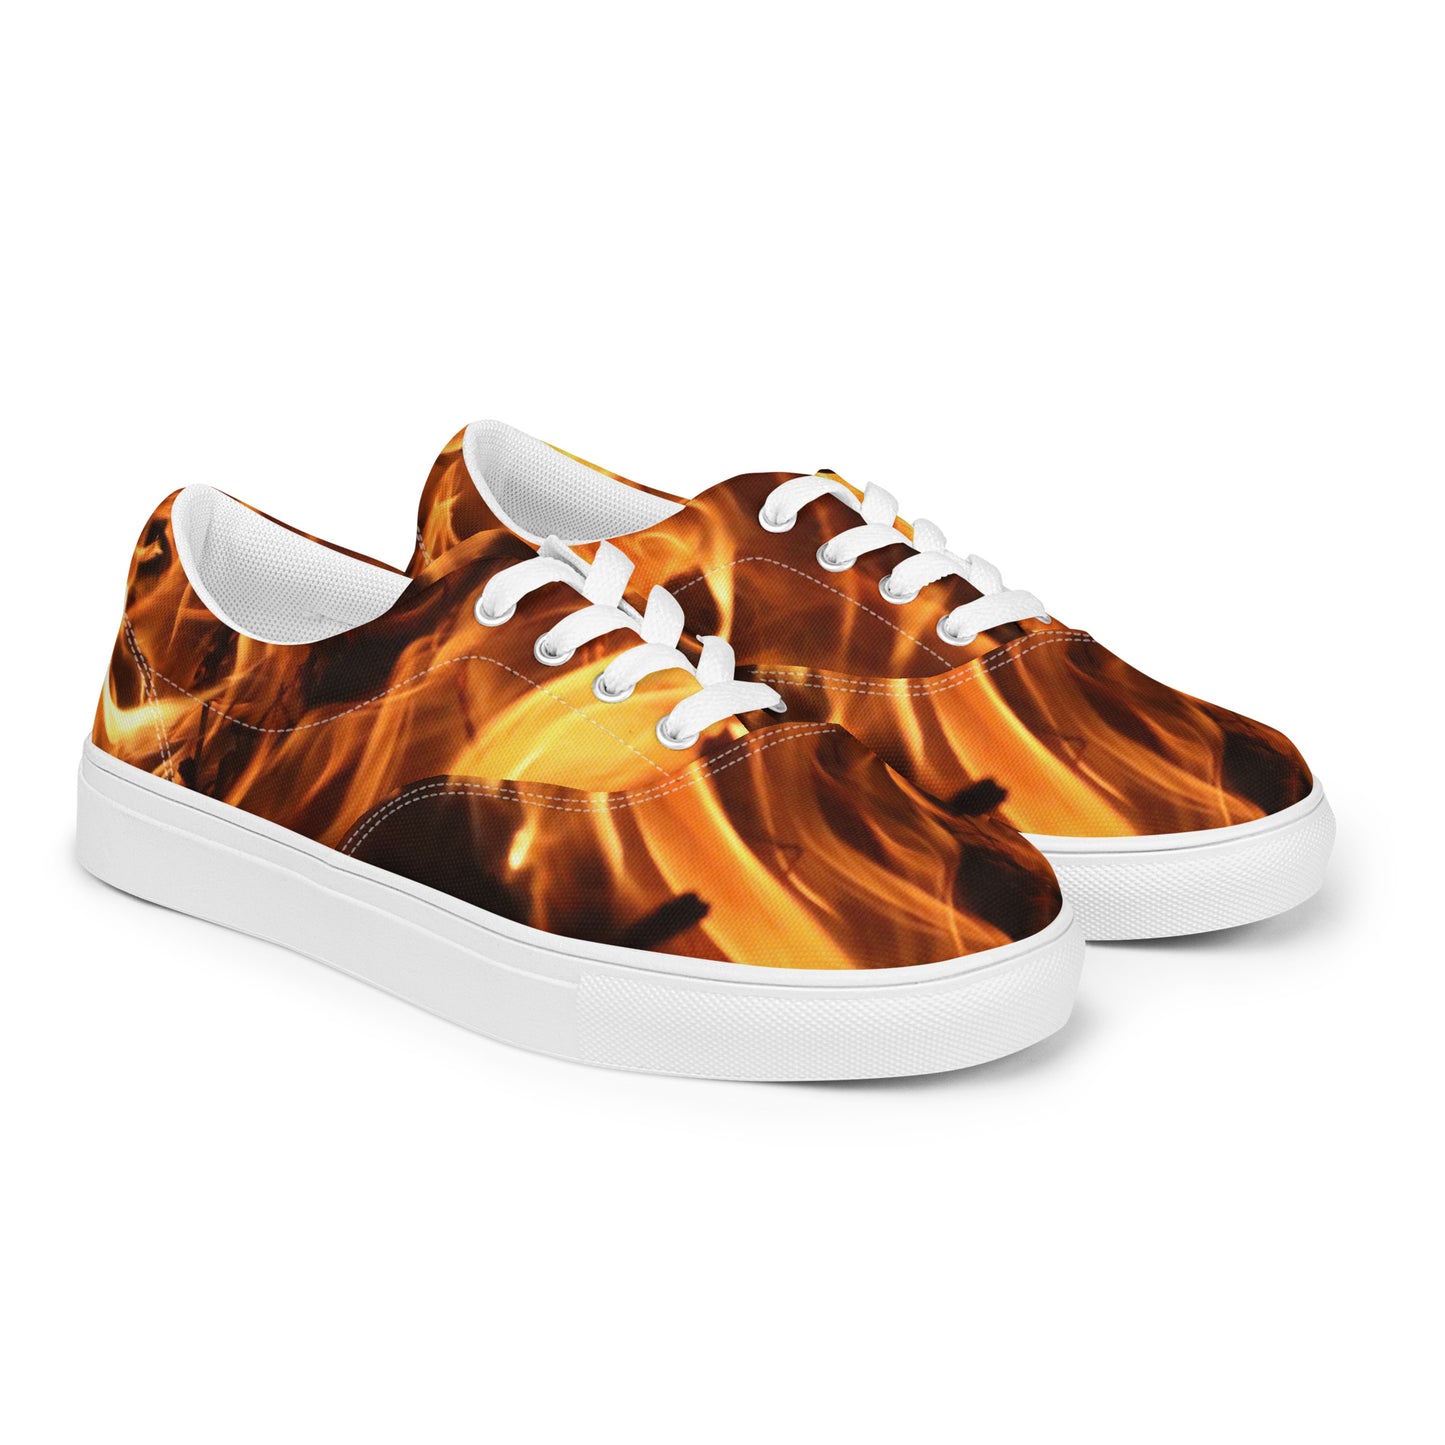 Fire Spirits Women’s lace-up canvas shoes - "Walk Your Talk"